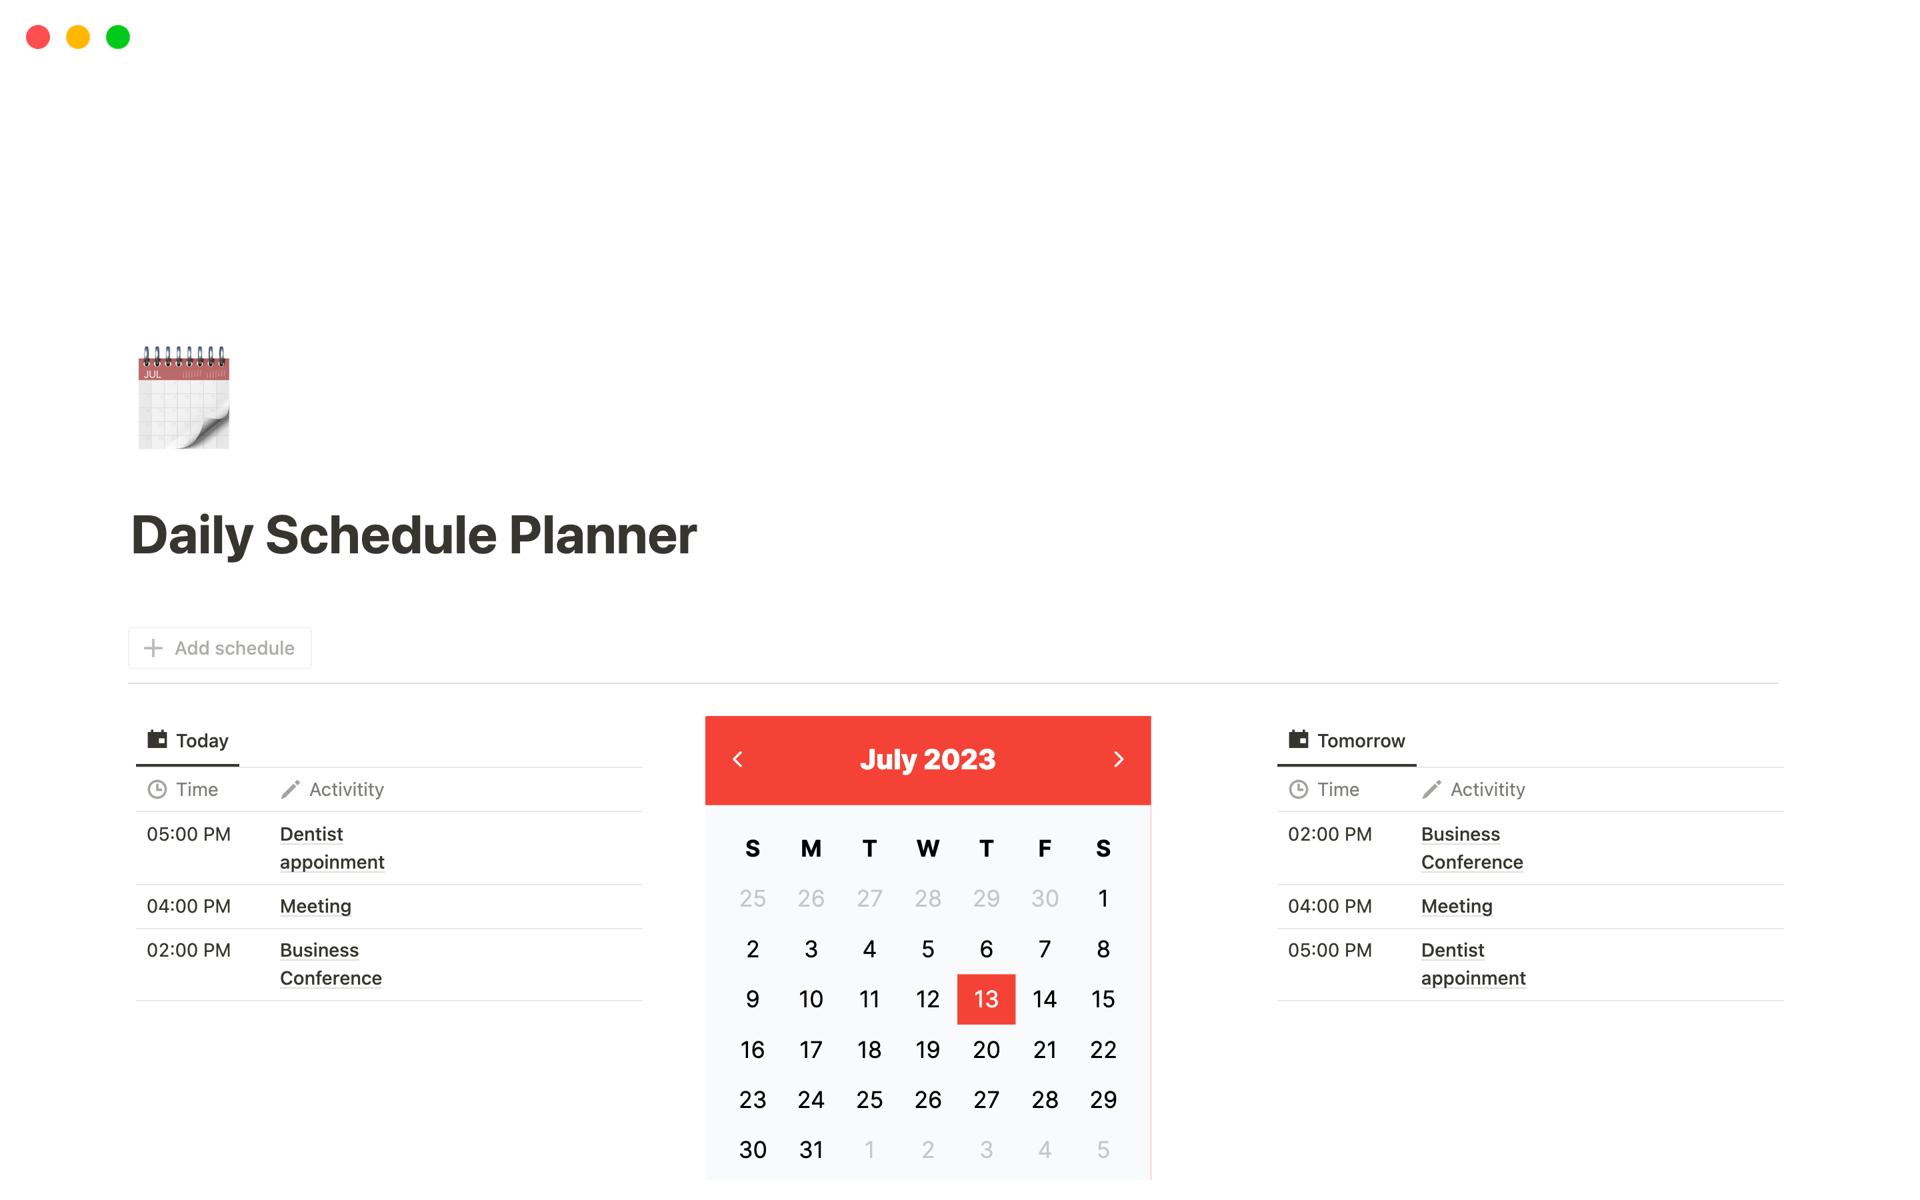 The Daily Schedule Planner Notion Template is a tool that helps you manage your daily schedule.